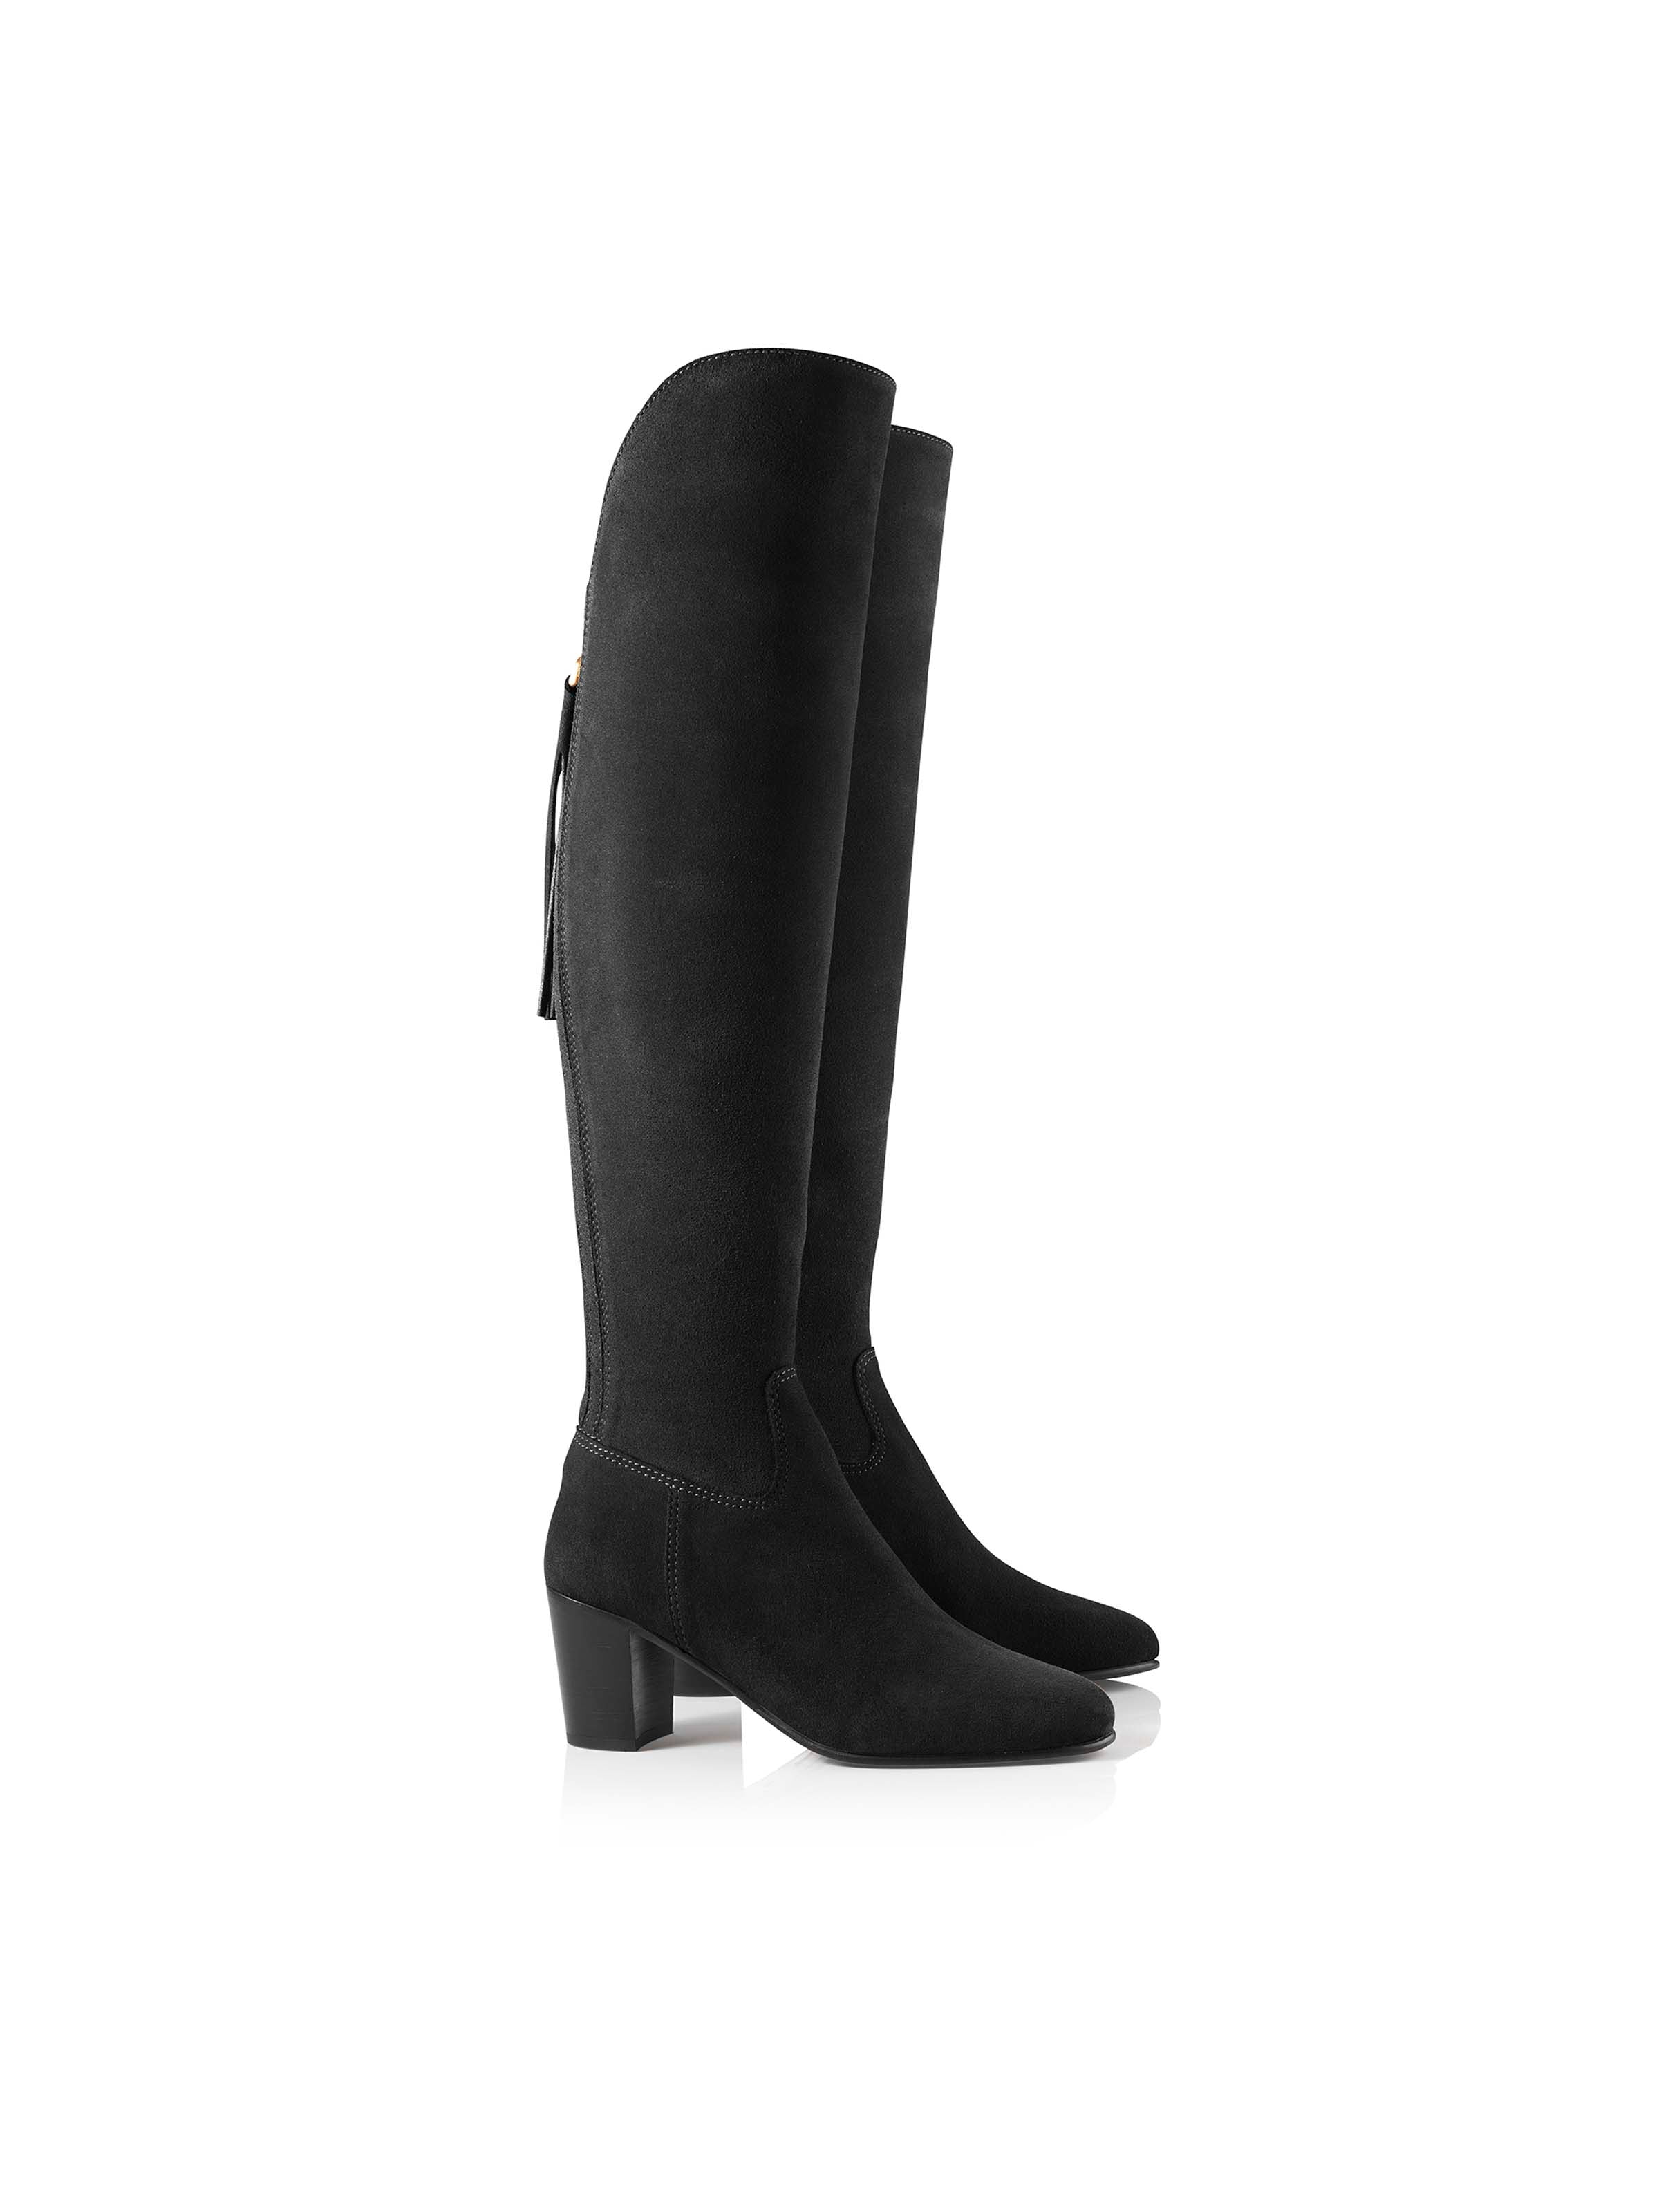 The Heeled Amira Boot - Black Suede